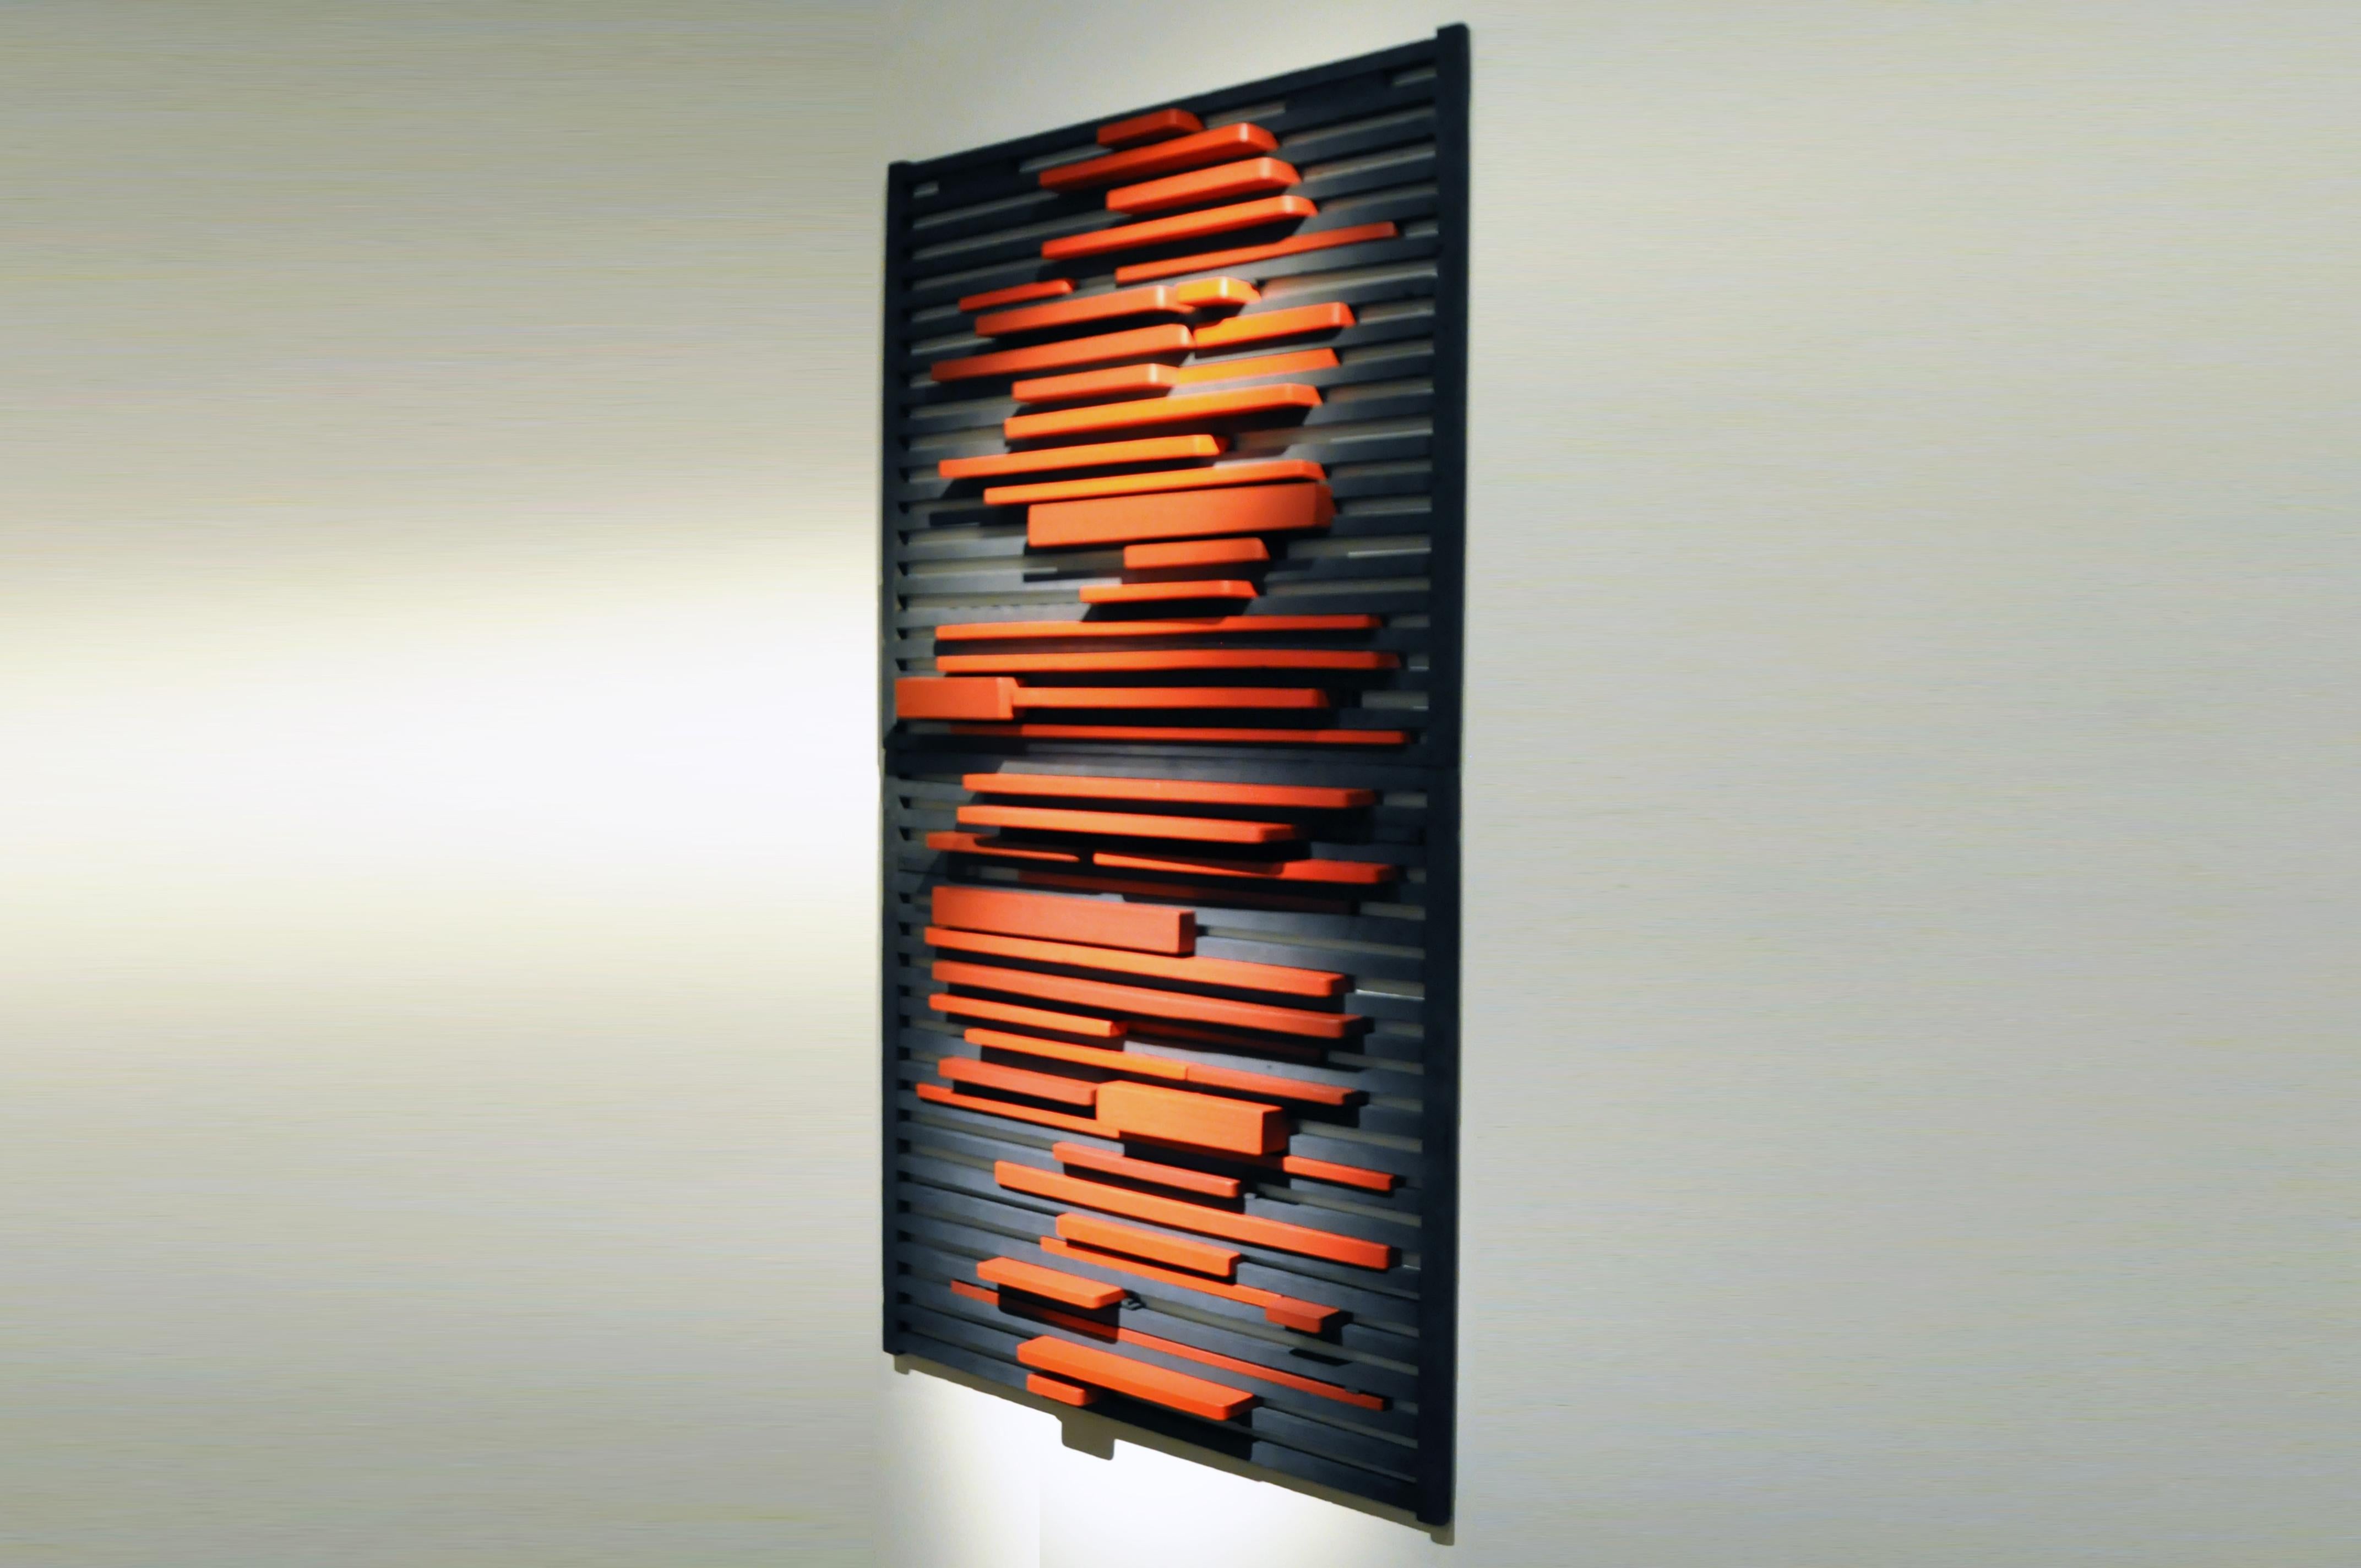 The relationship between color and sound is explored in this wooden construction. As musical sounds are made up of notes, visual compositions are made up of shape, color, texture, and relation to one another. The cinnabar keys are subtly different